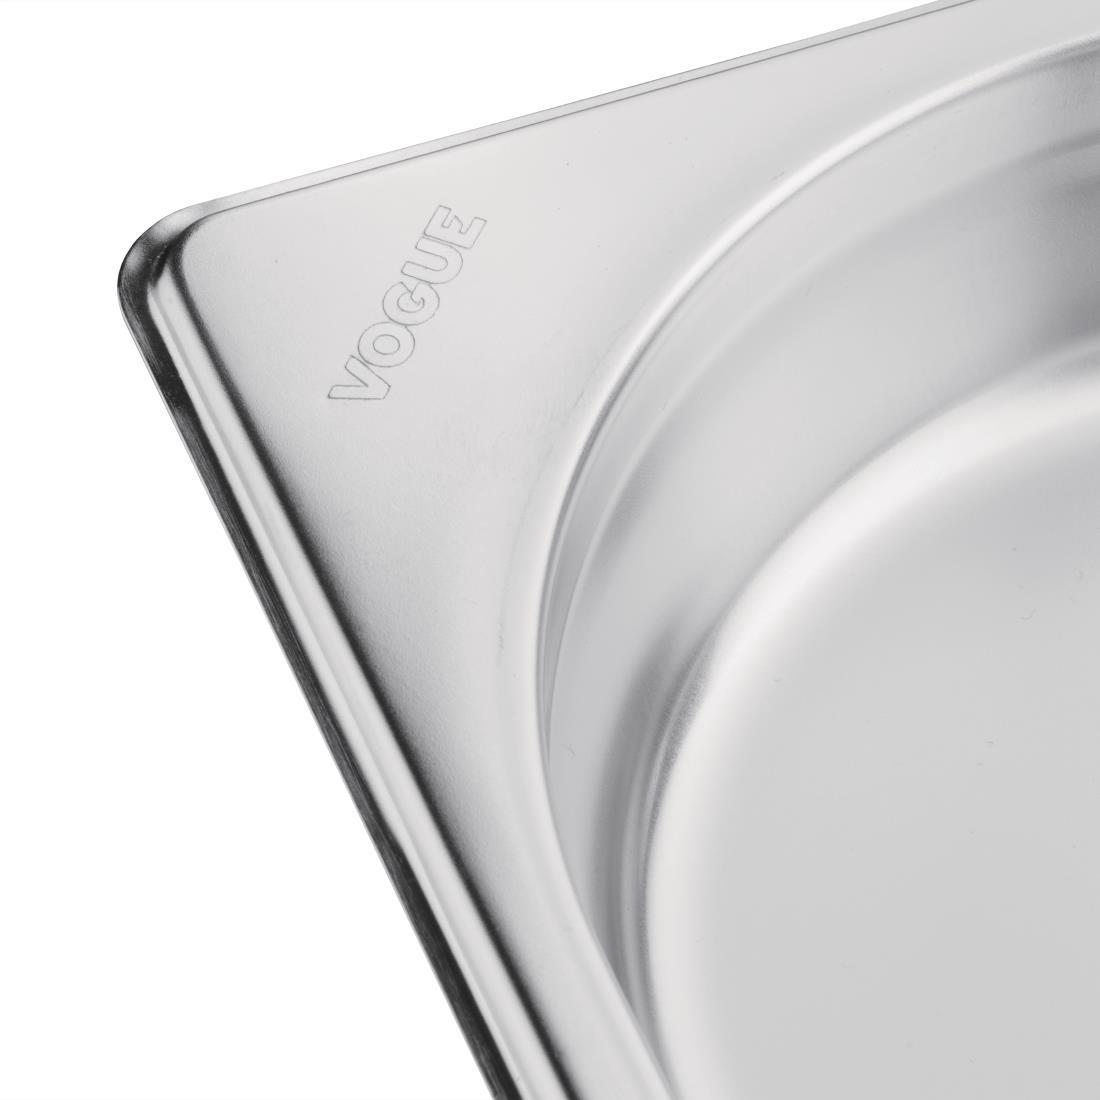 Vogue Stainless Steel 1/2 Gastronorm Pan 65mm - K927  - 6